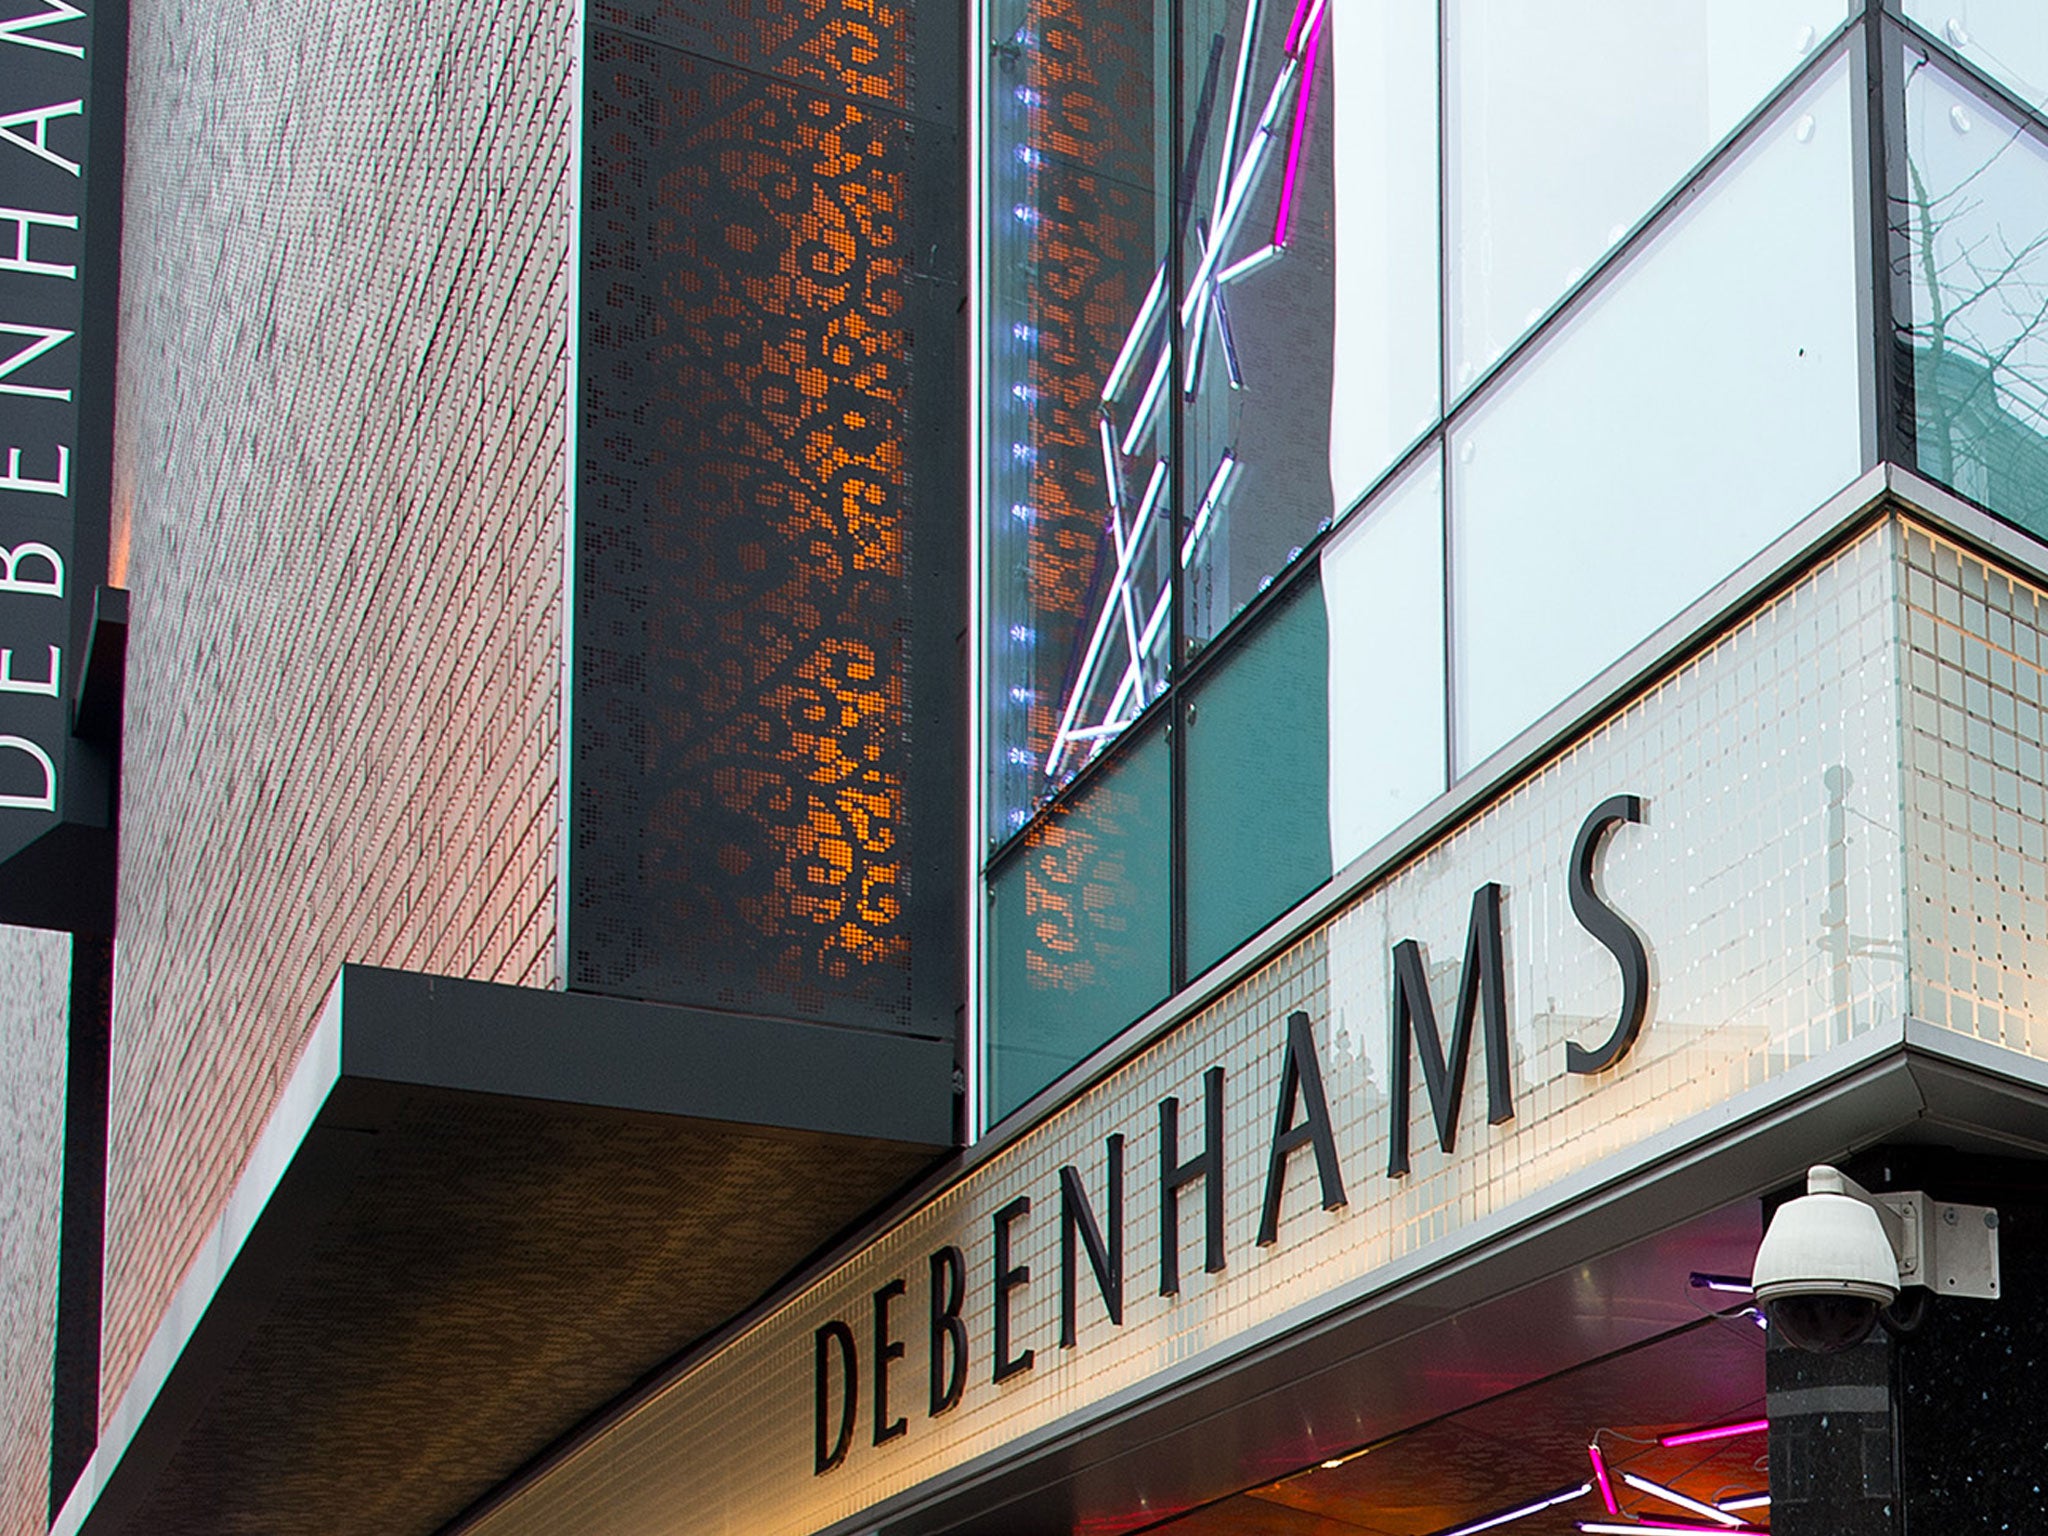 Debenhams shares fell as the company said gross margins would likely be at the lower end of forecasts